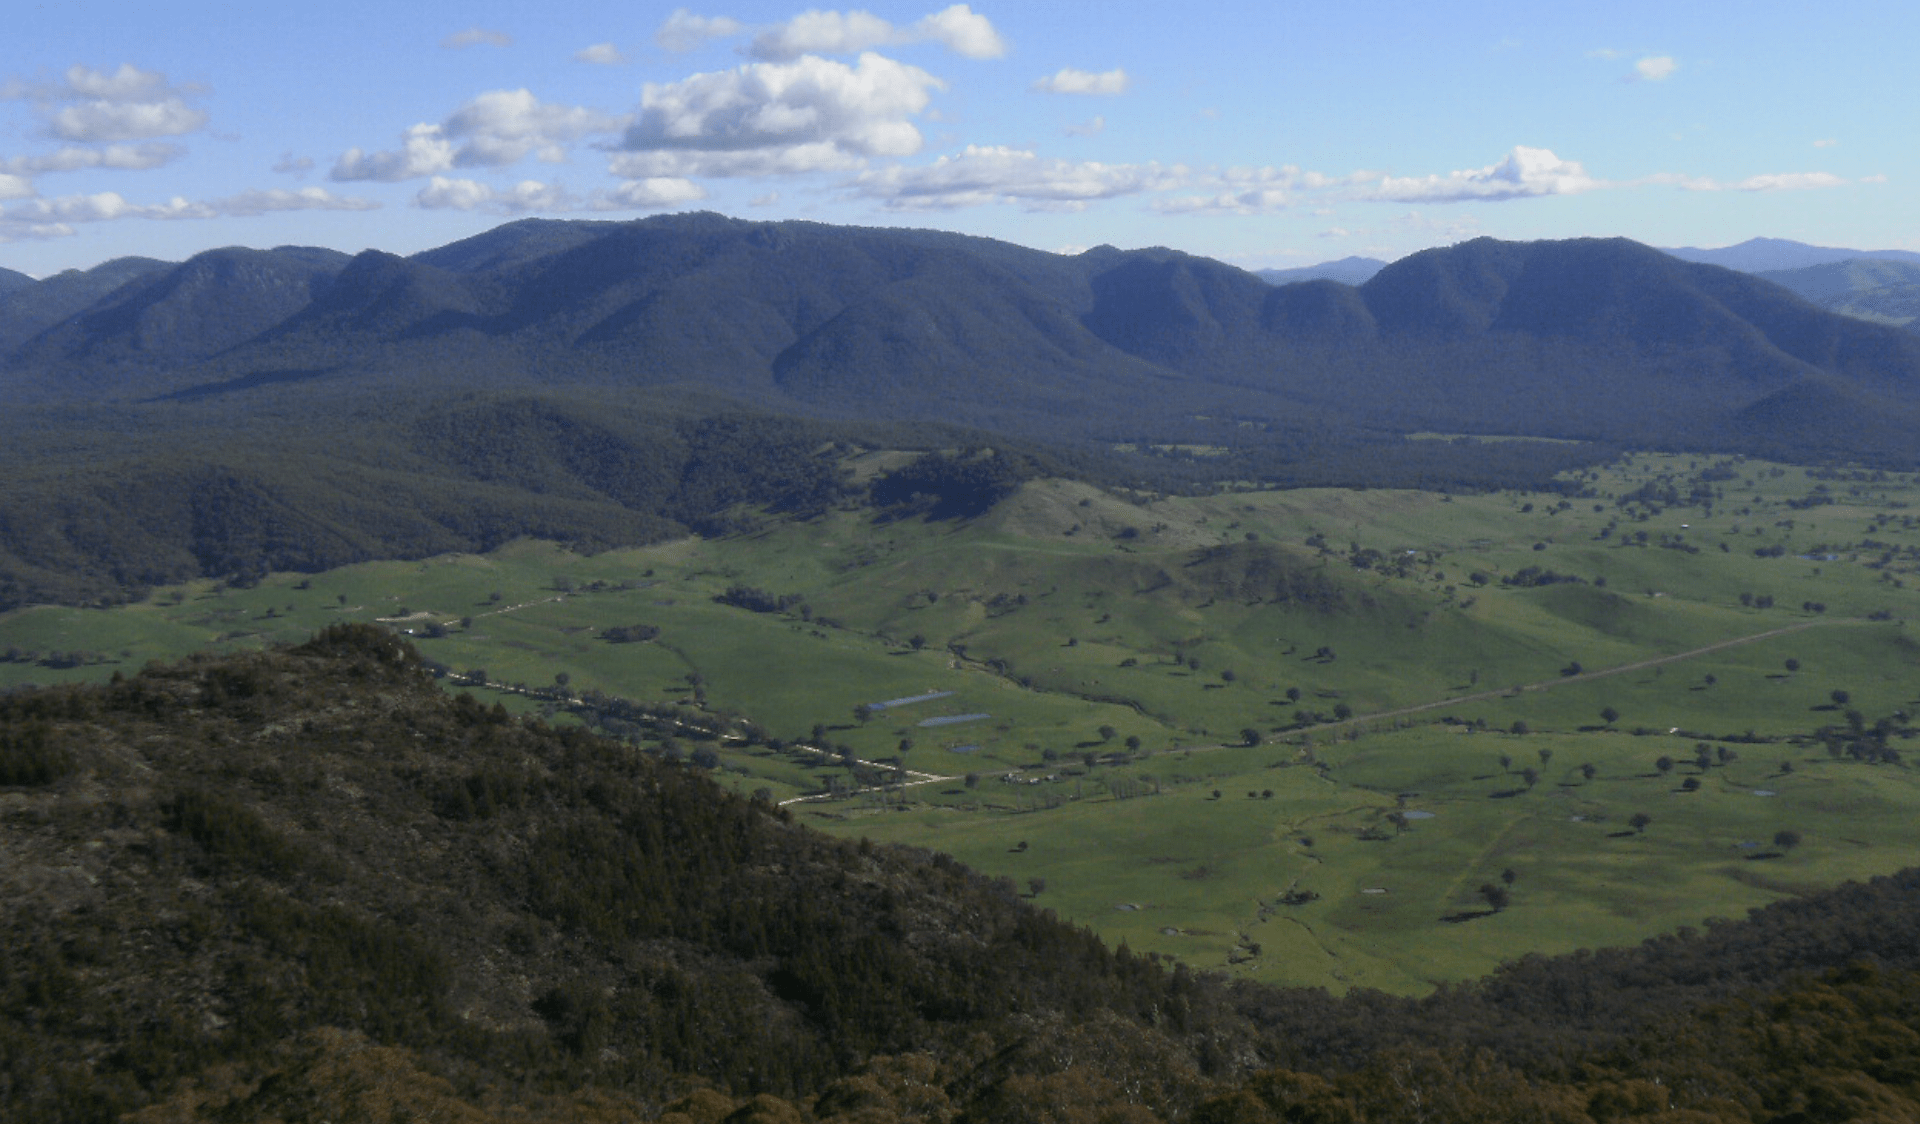 The view of Burrowa-Pine Mountain National Park from Pine Mountain